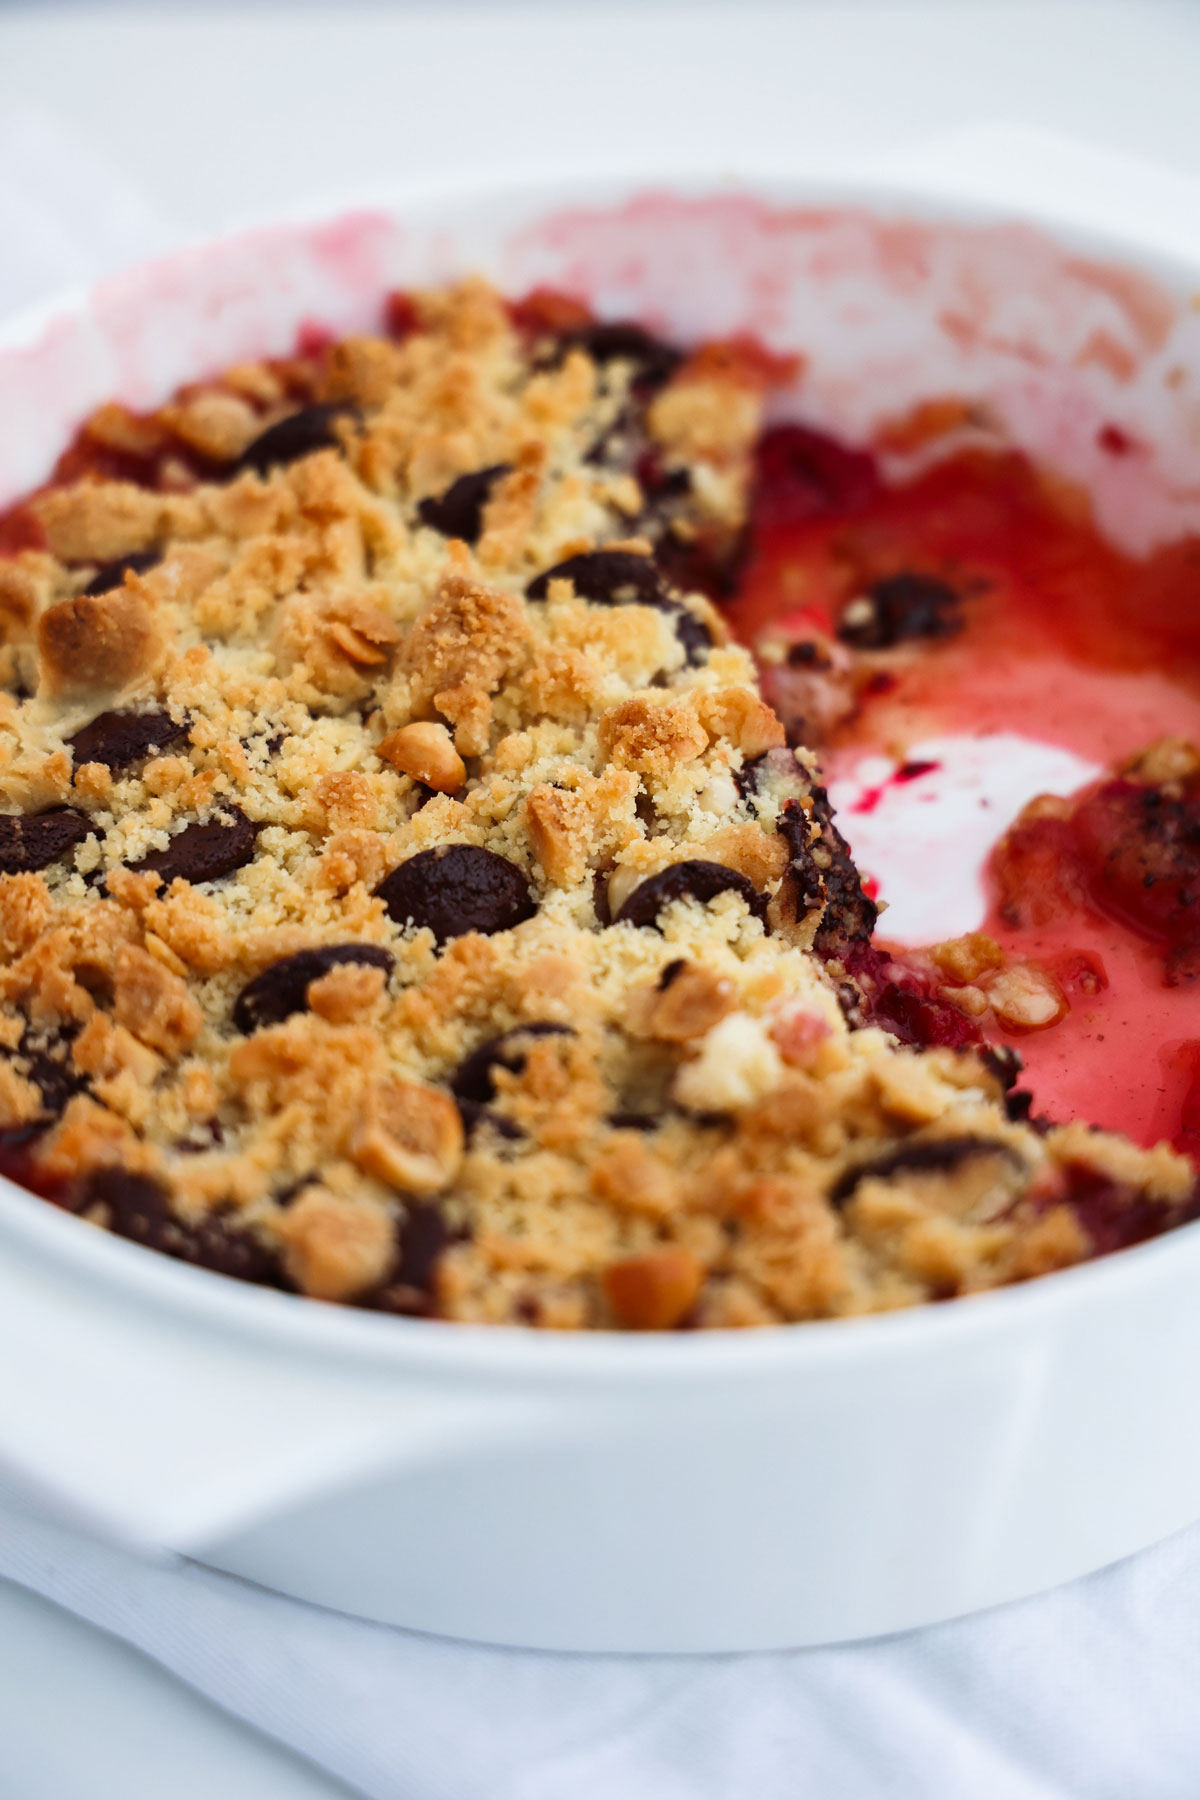 Baked apple and raspberry crumble with a golden crisp topping and read saucy fruit base in a white oven dish.